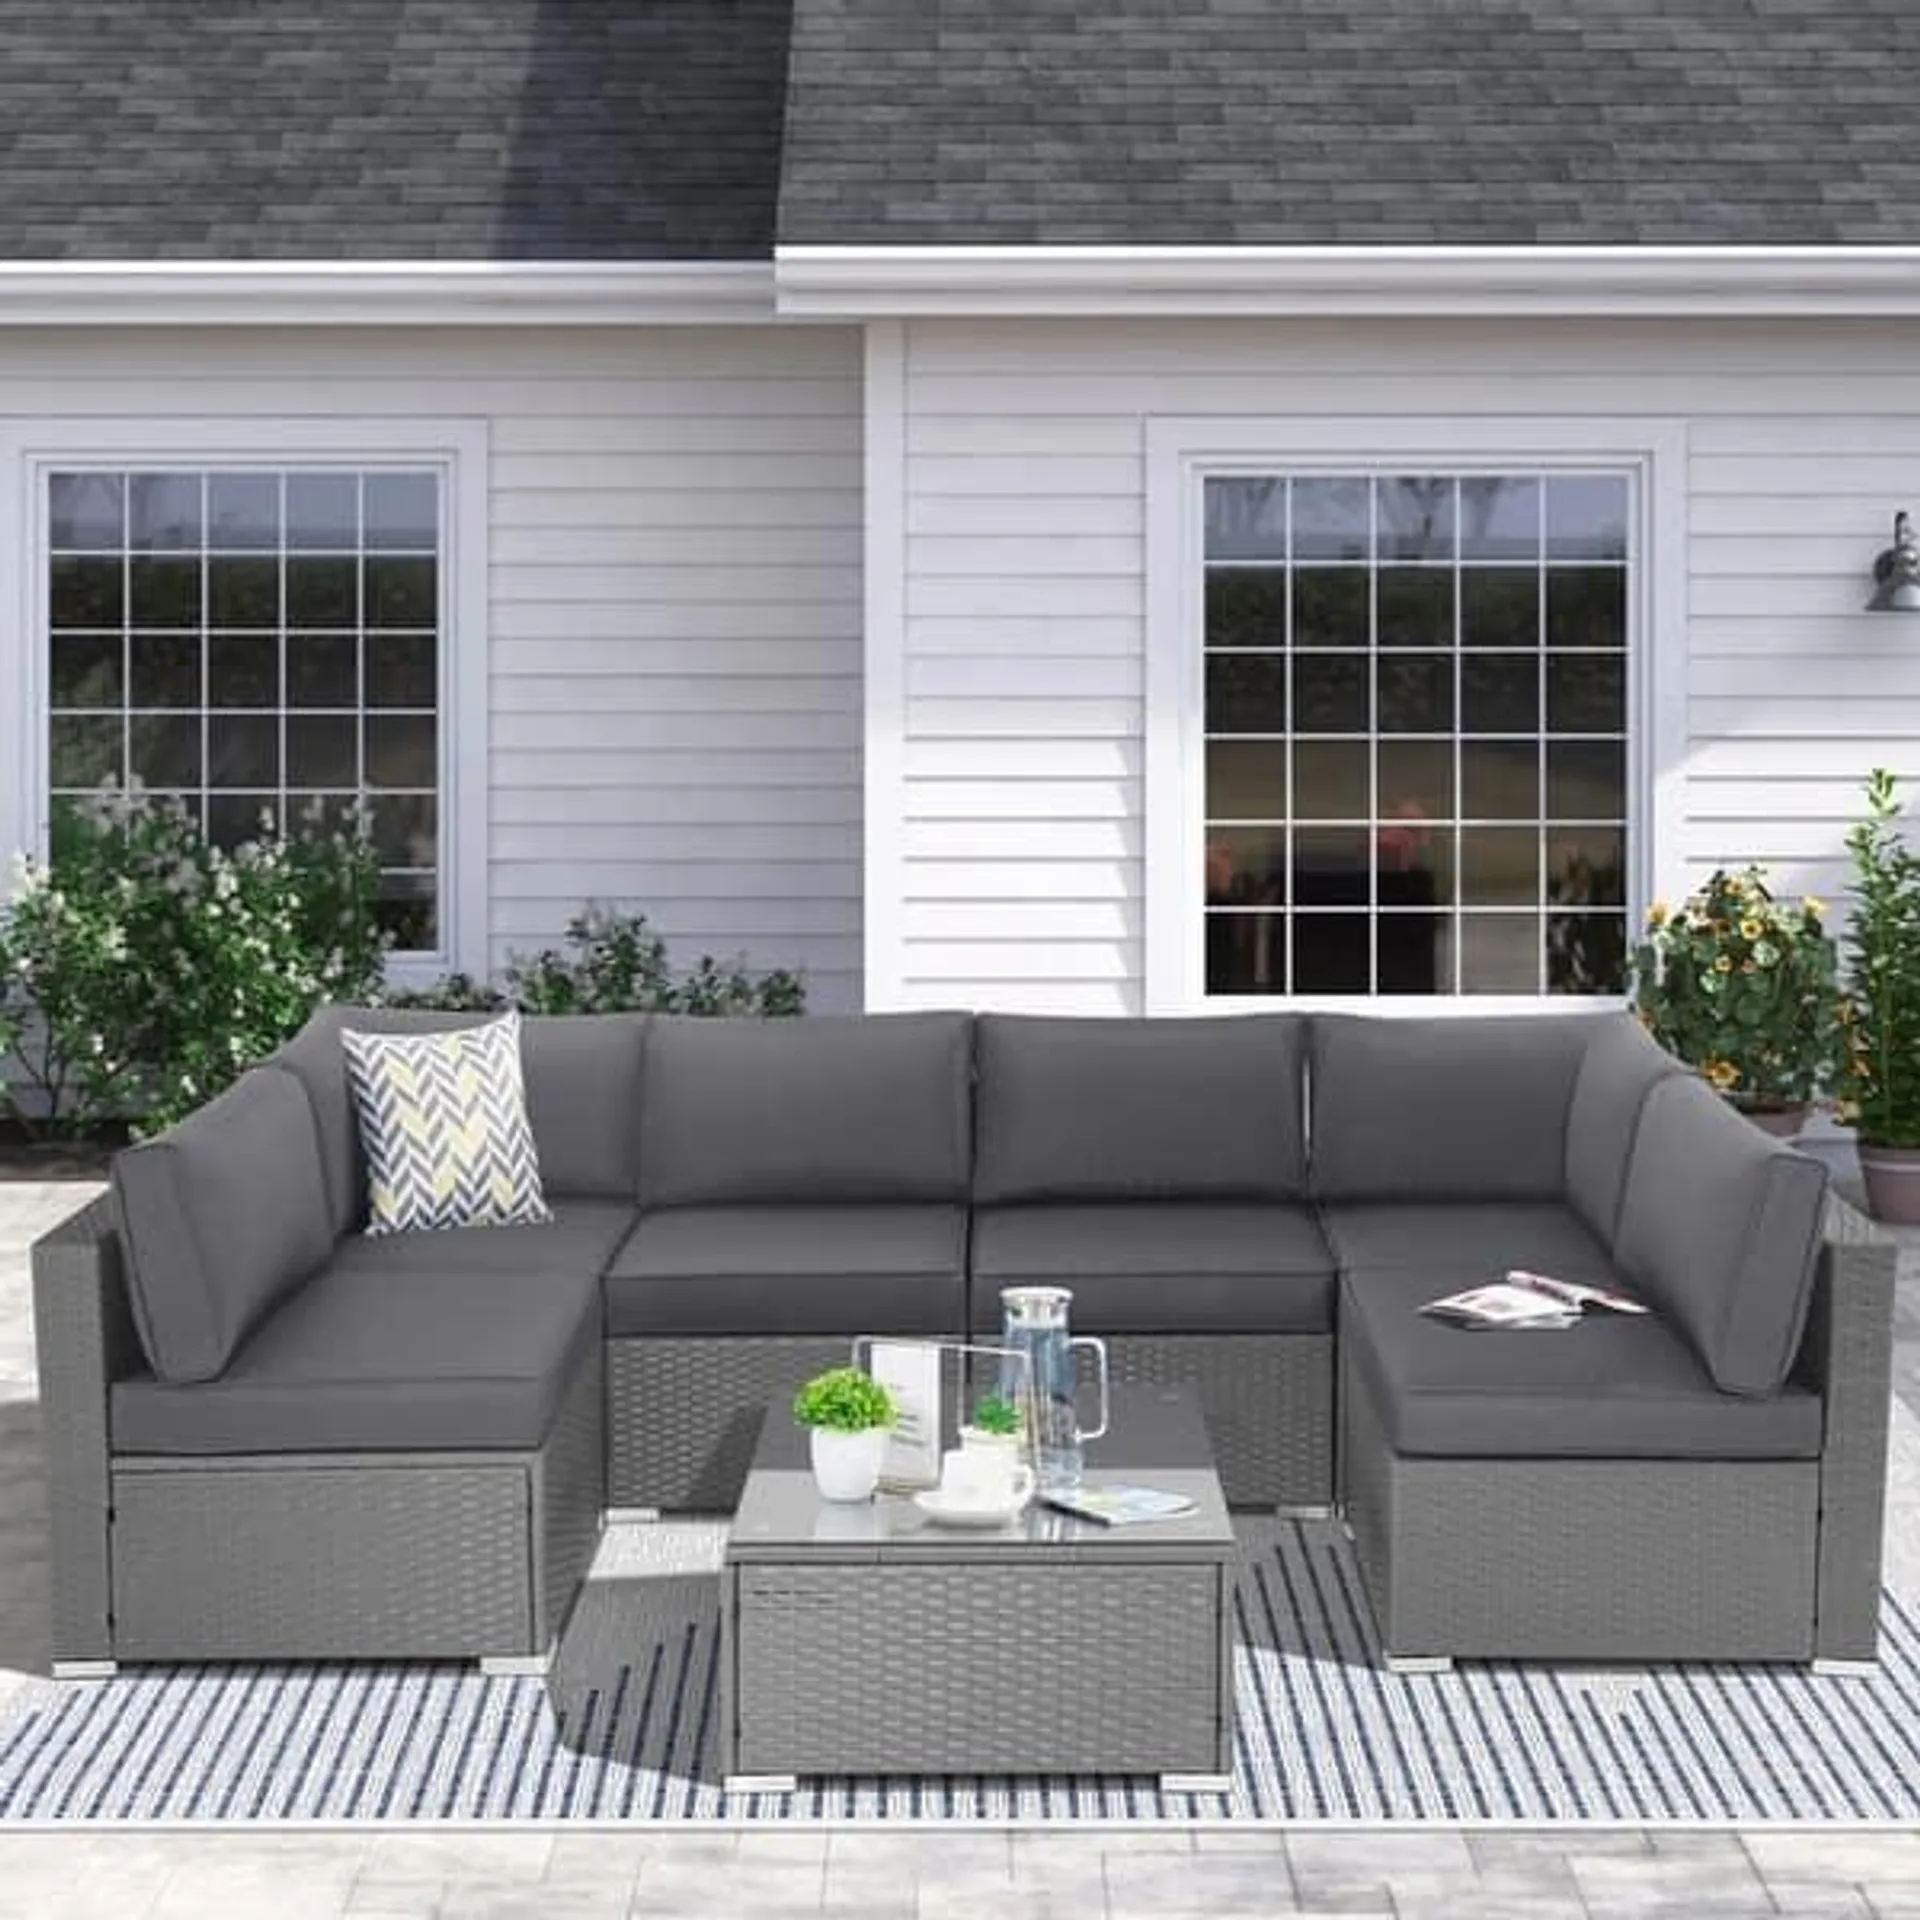 SUNCROWN Outdoor 7 Pieces Patio Furniture Grey Wicker Sectional Sofa Set